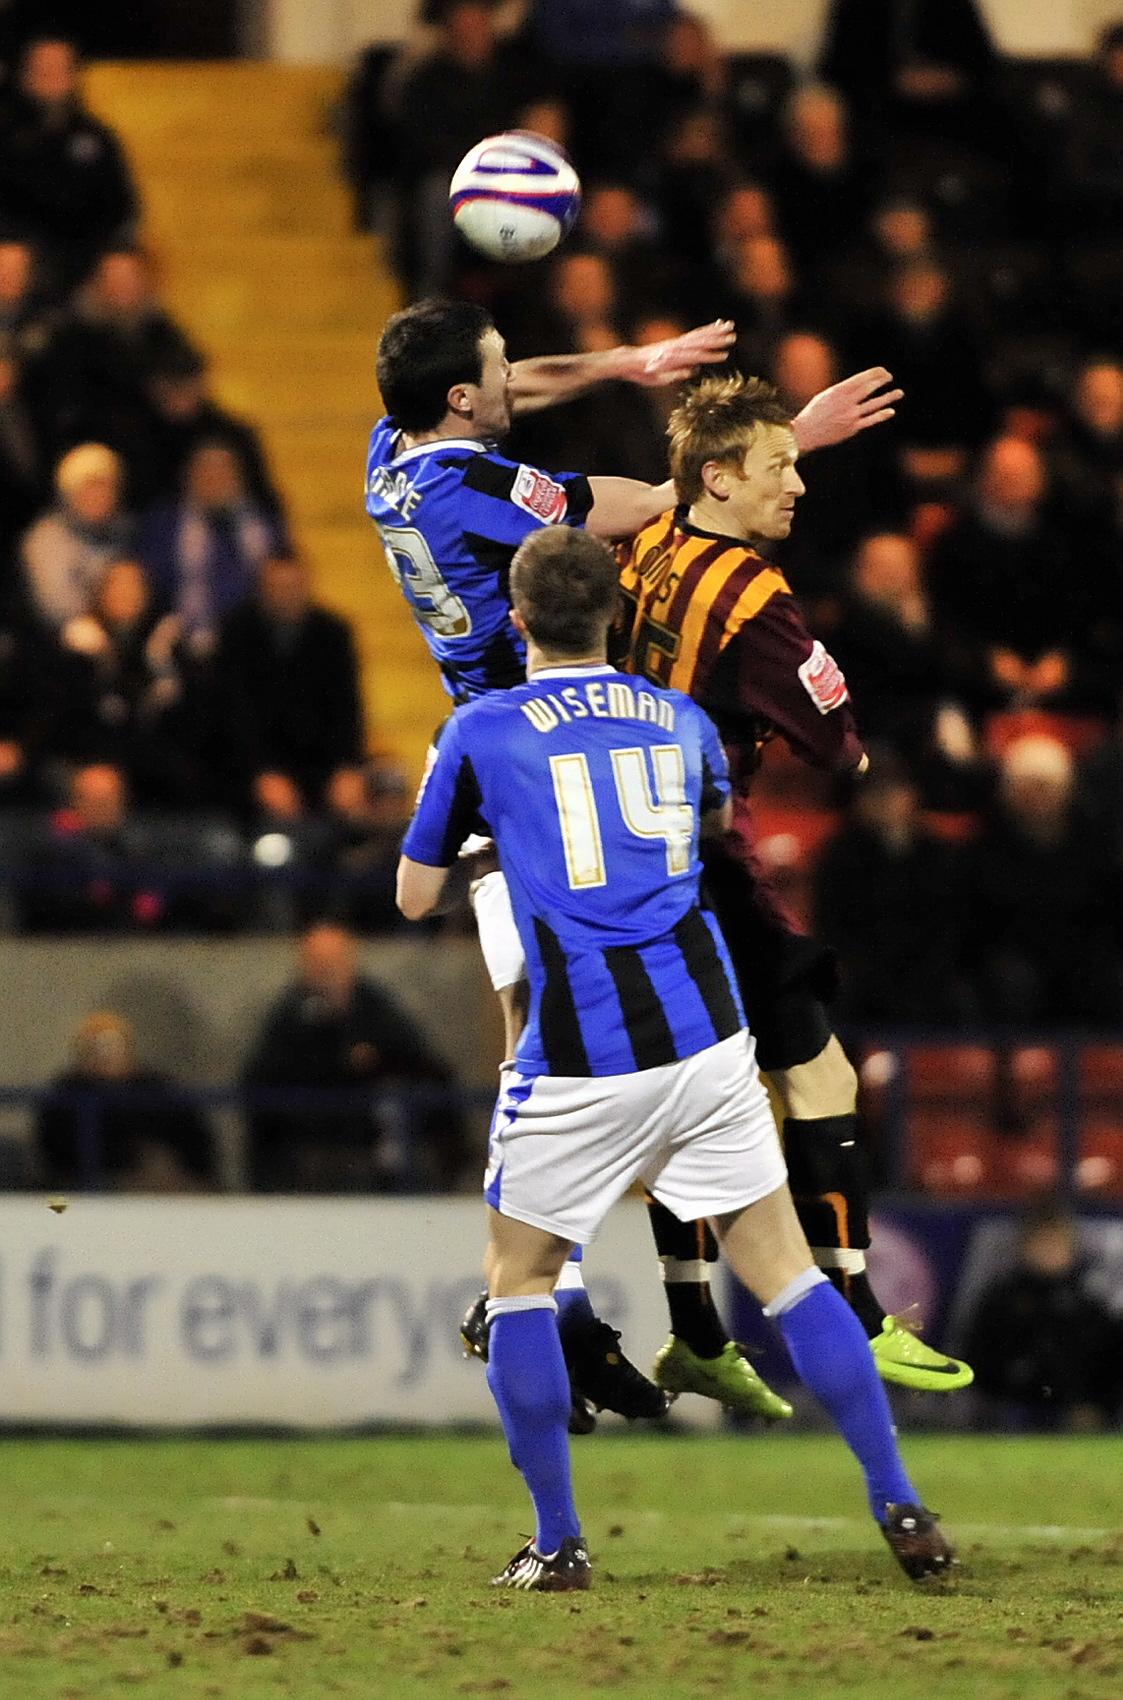 Match action from City's hame at Rochdale.